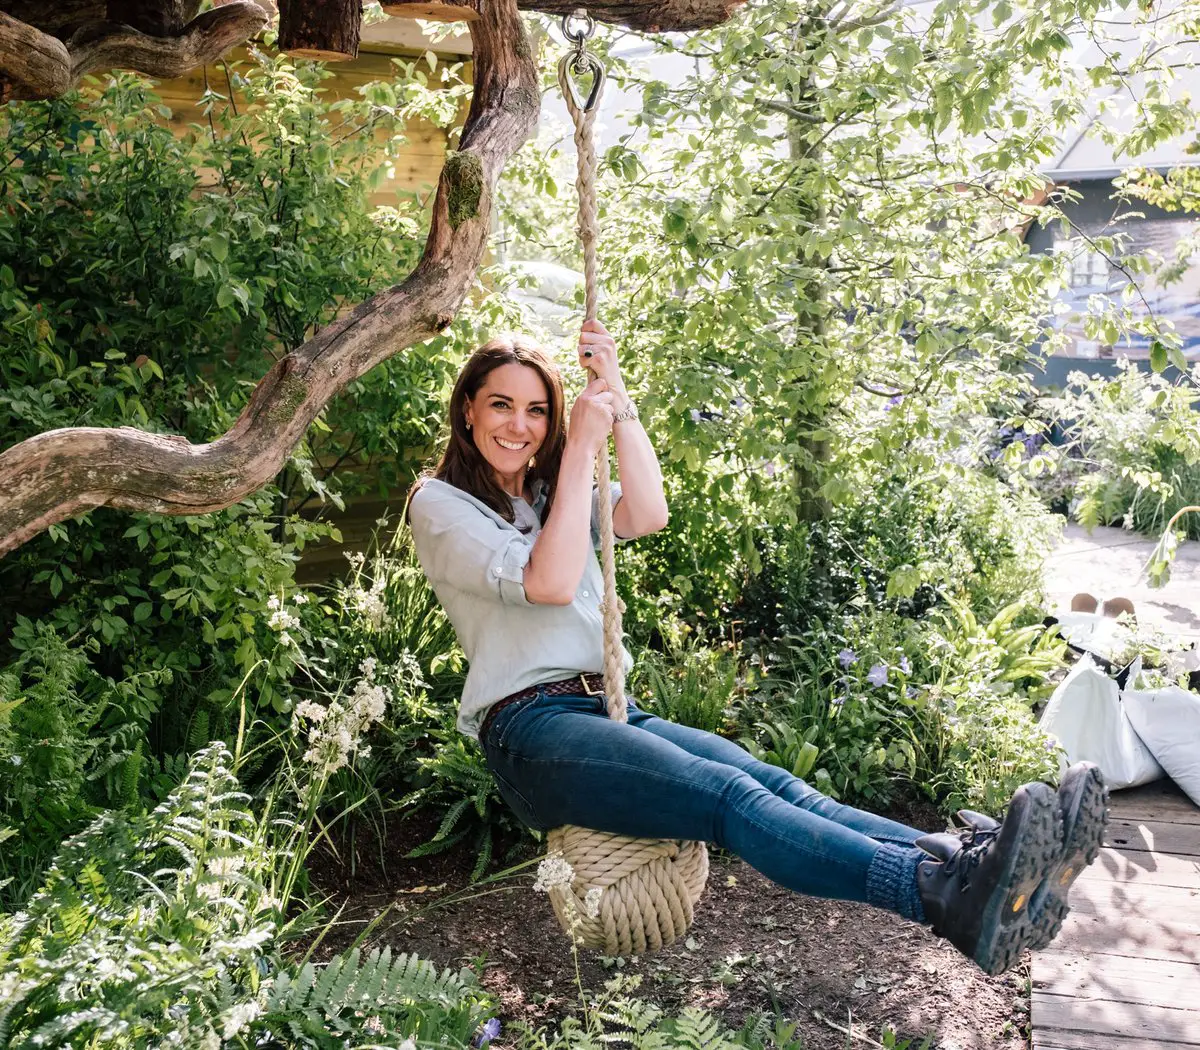 The Duchess of Cambridge Gave Final Touches to Her Back to Nature Garden